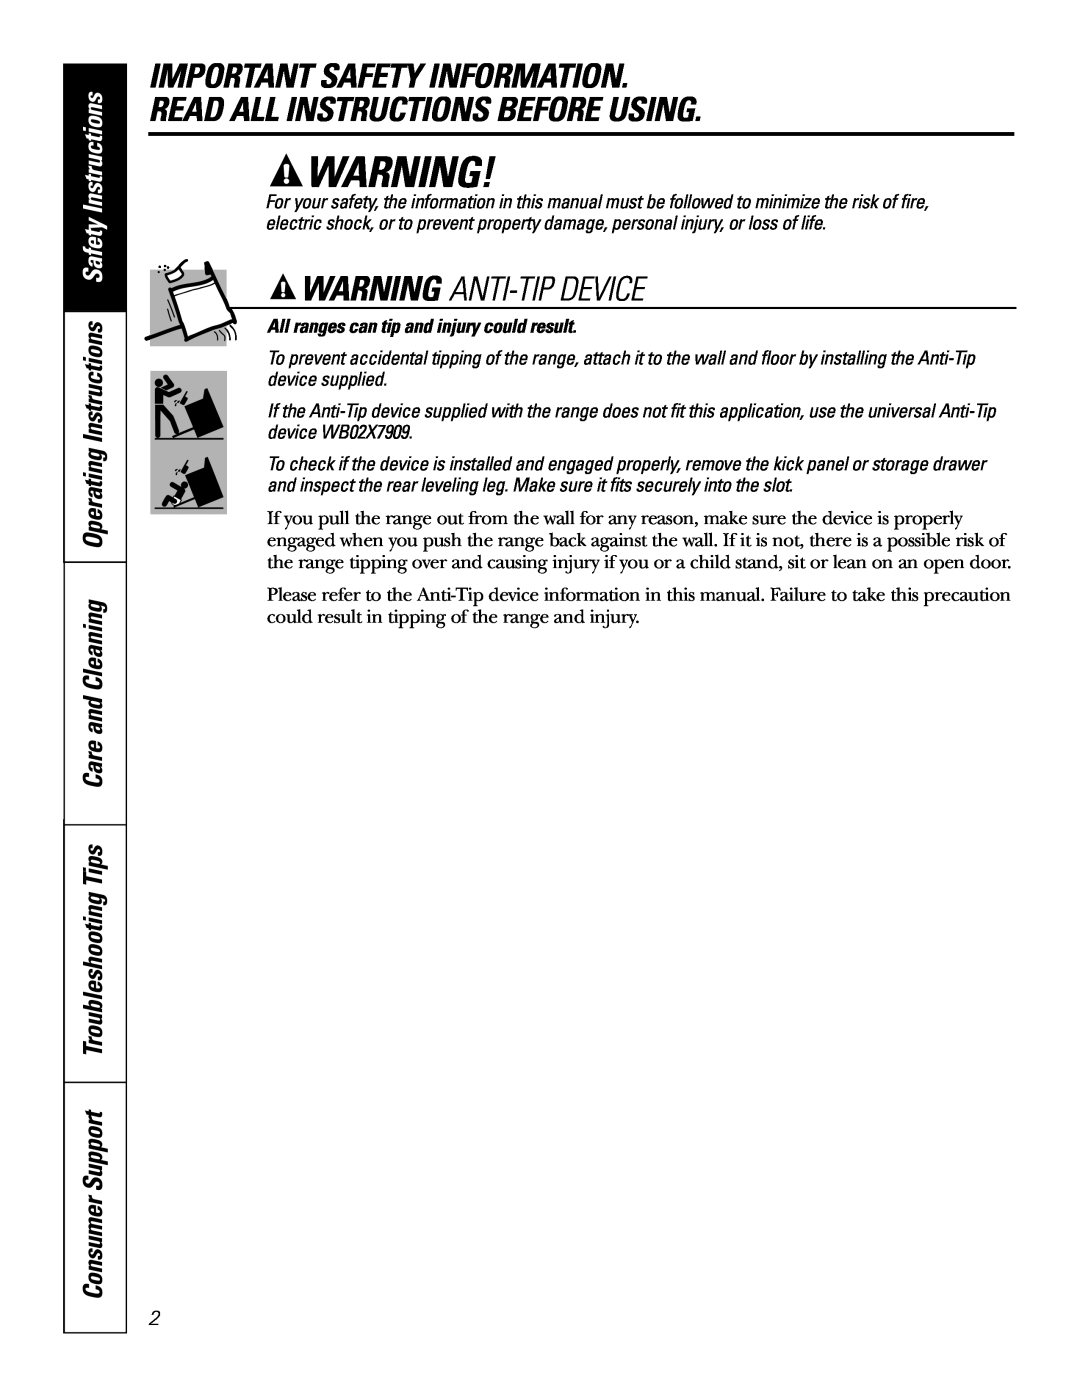 GE EER3002 owner manual Important Safety Information Read All Instructions Before Using, Warning Anti-Tip Device 